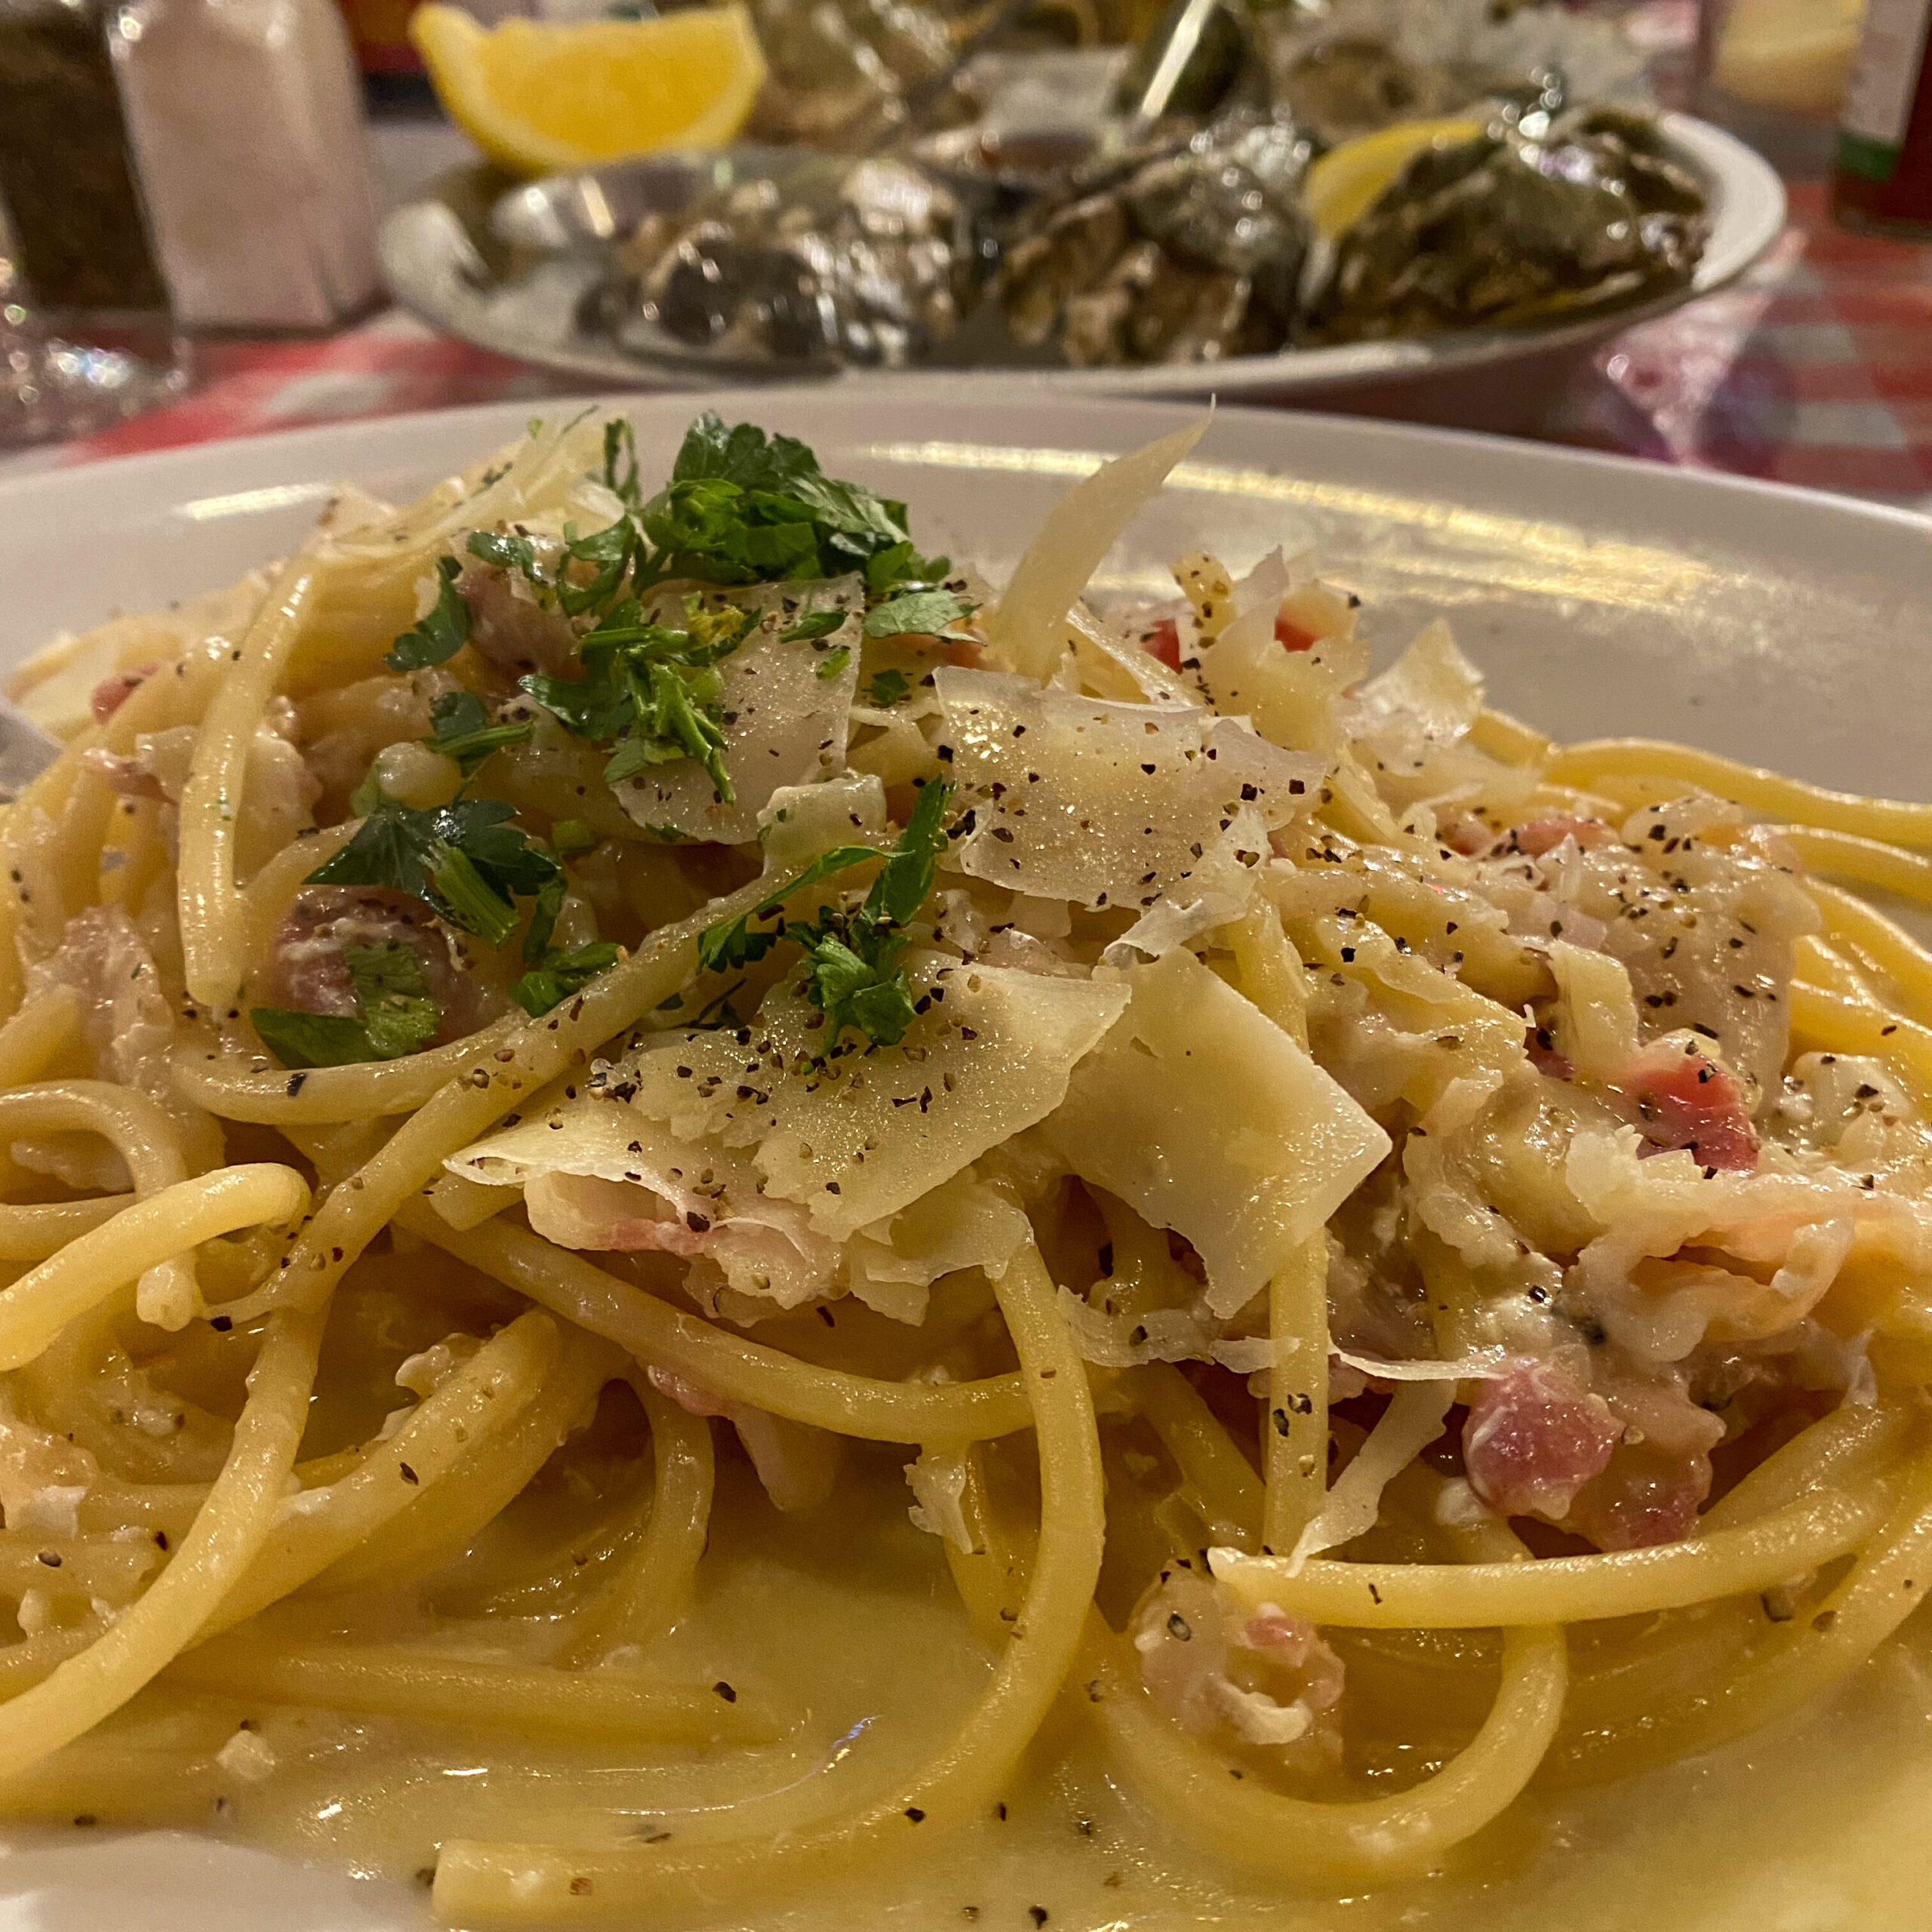 A serving of pasta carbonara garnished with black pepper and fresh herbs. In the background is a plate of oysters.